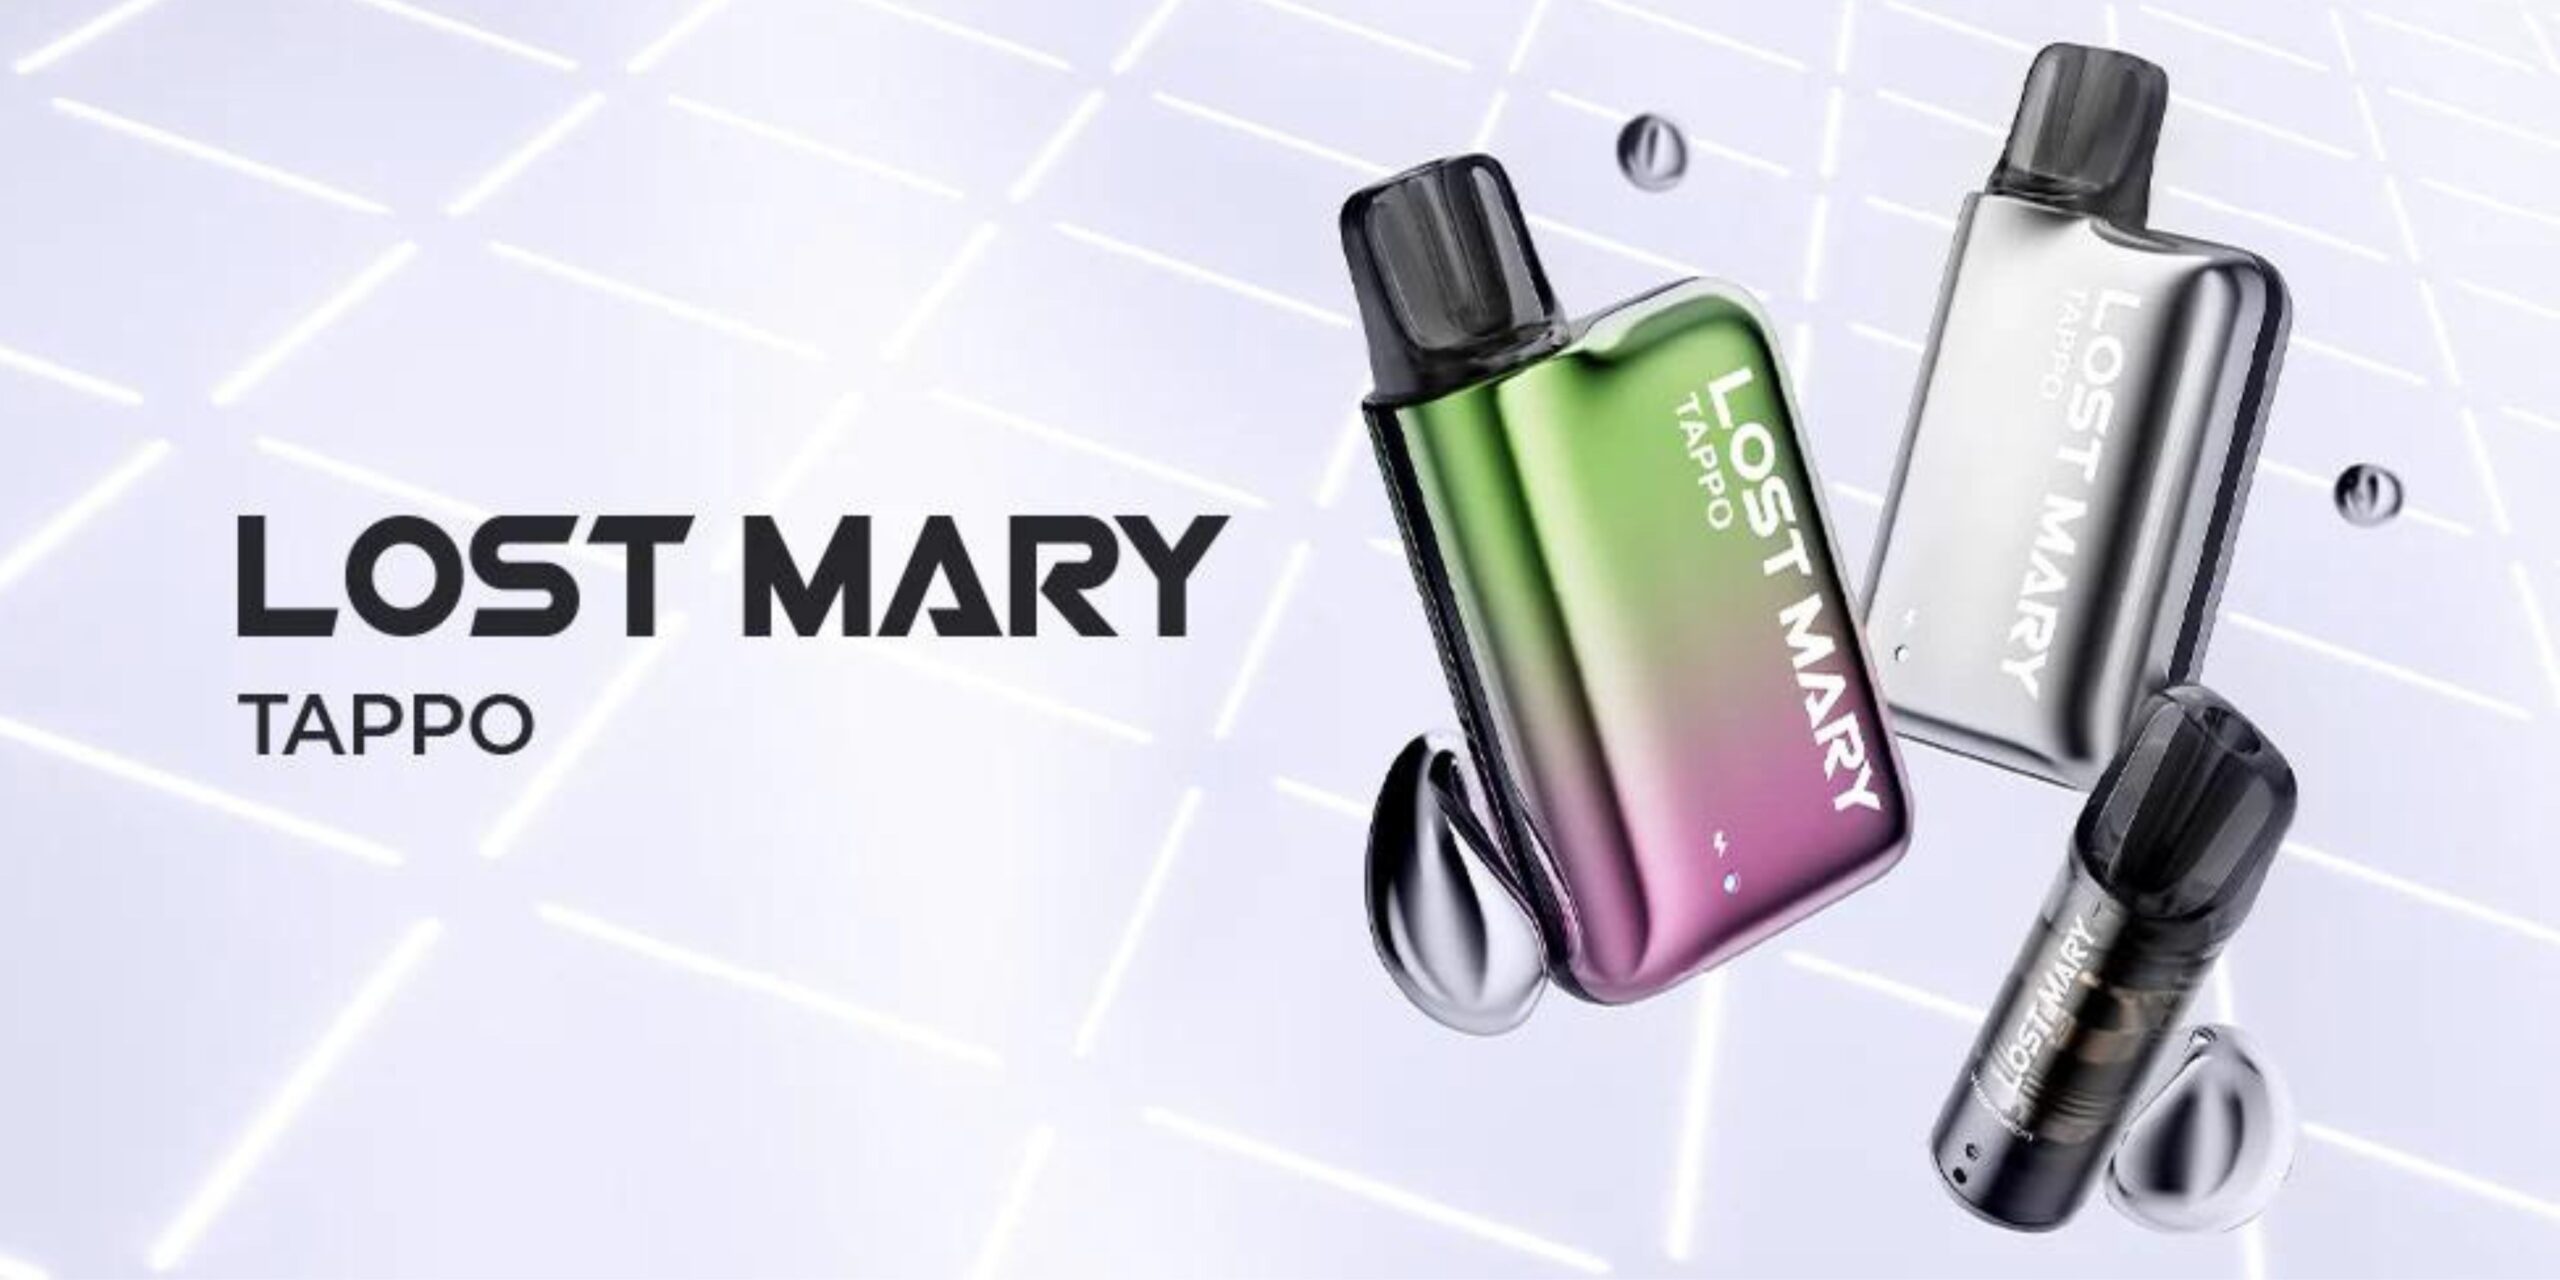 LOST MARY TAPPO – Strawberry Raspberry (Replacement Prefilled Pods) VAPING - XMANIA Ireland 15